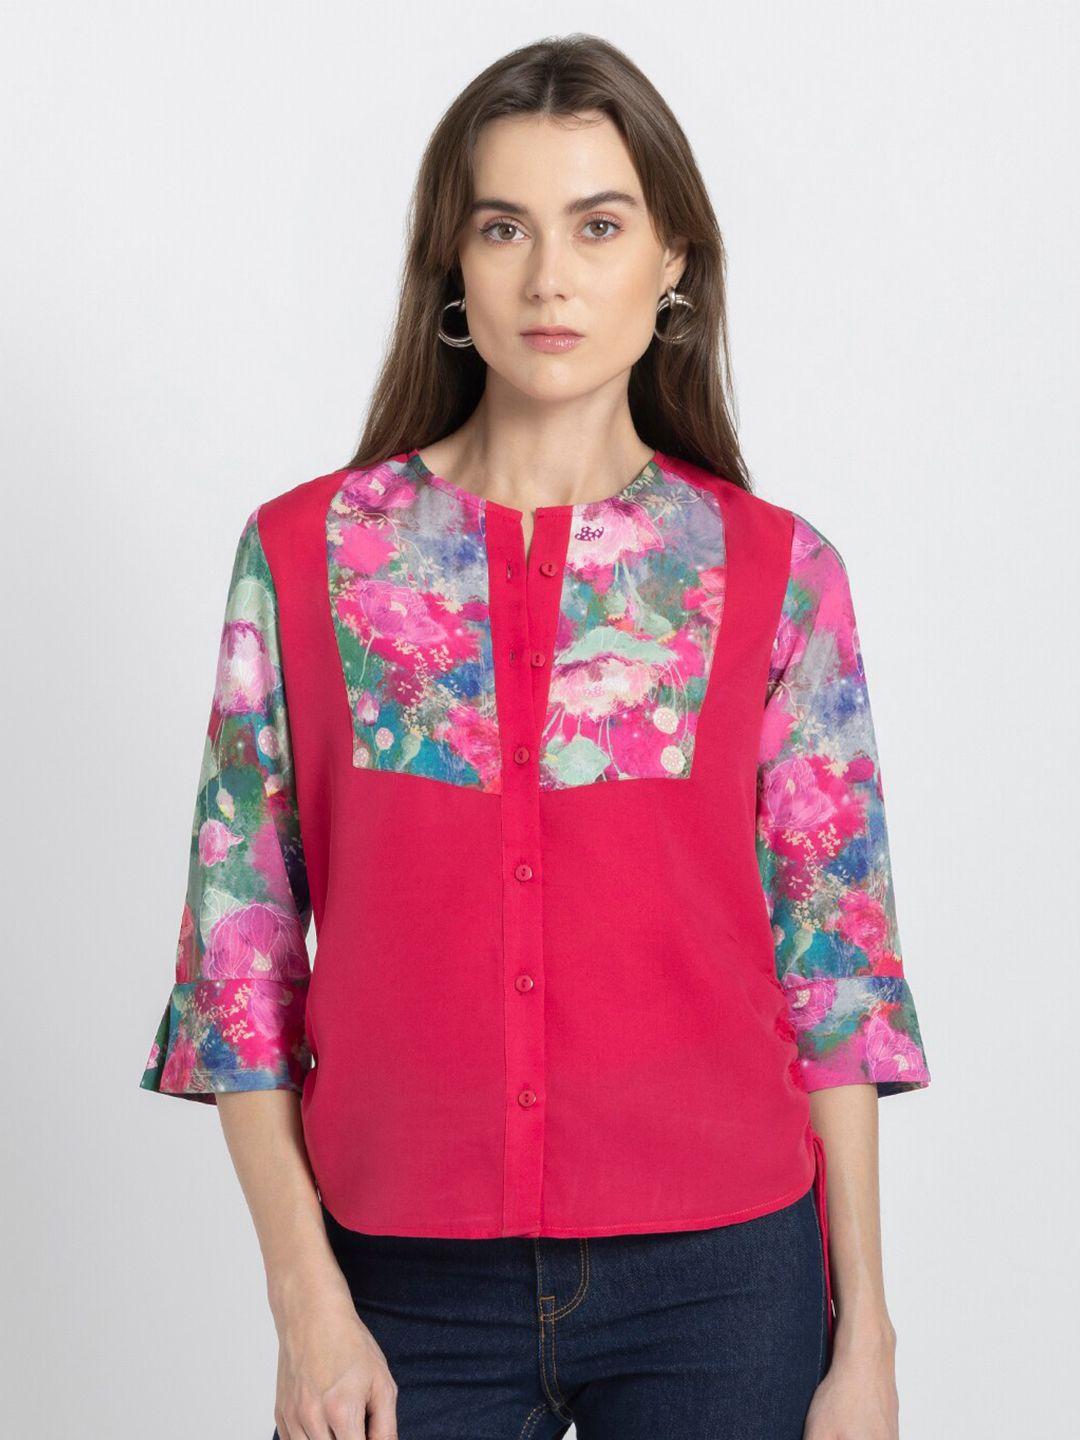 shaye smart floral opaque printed round neck casual shirt